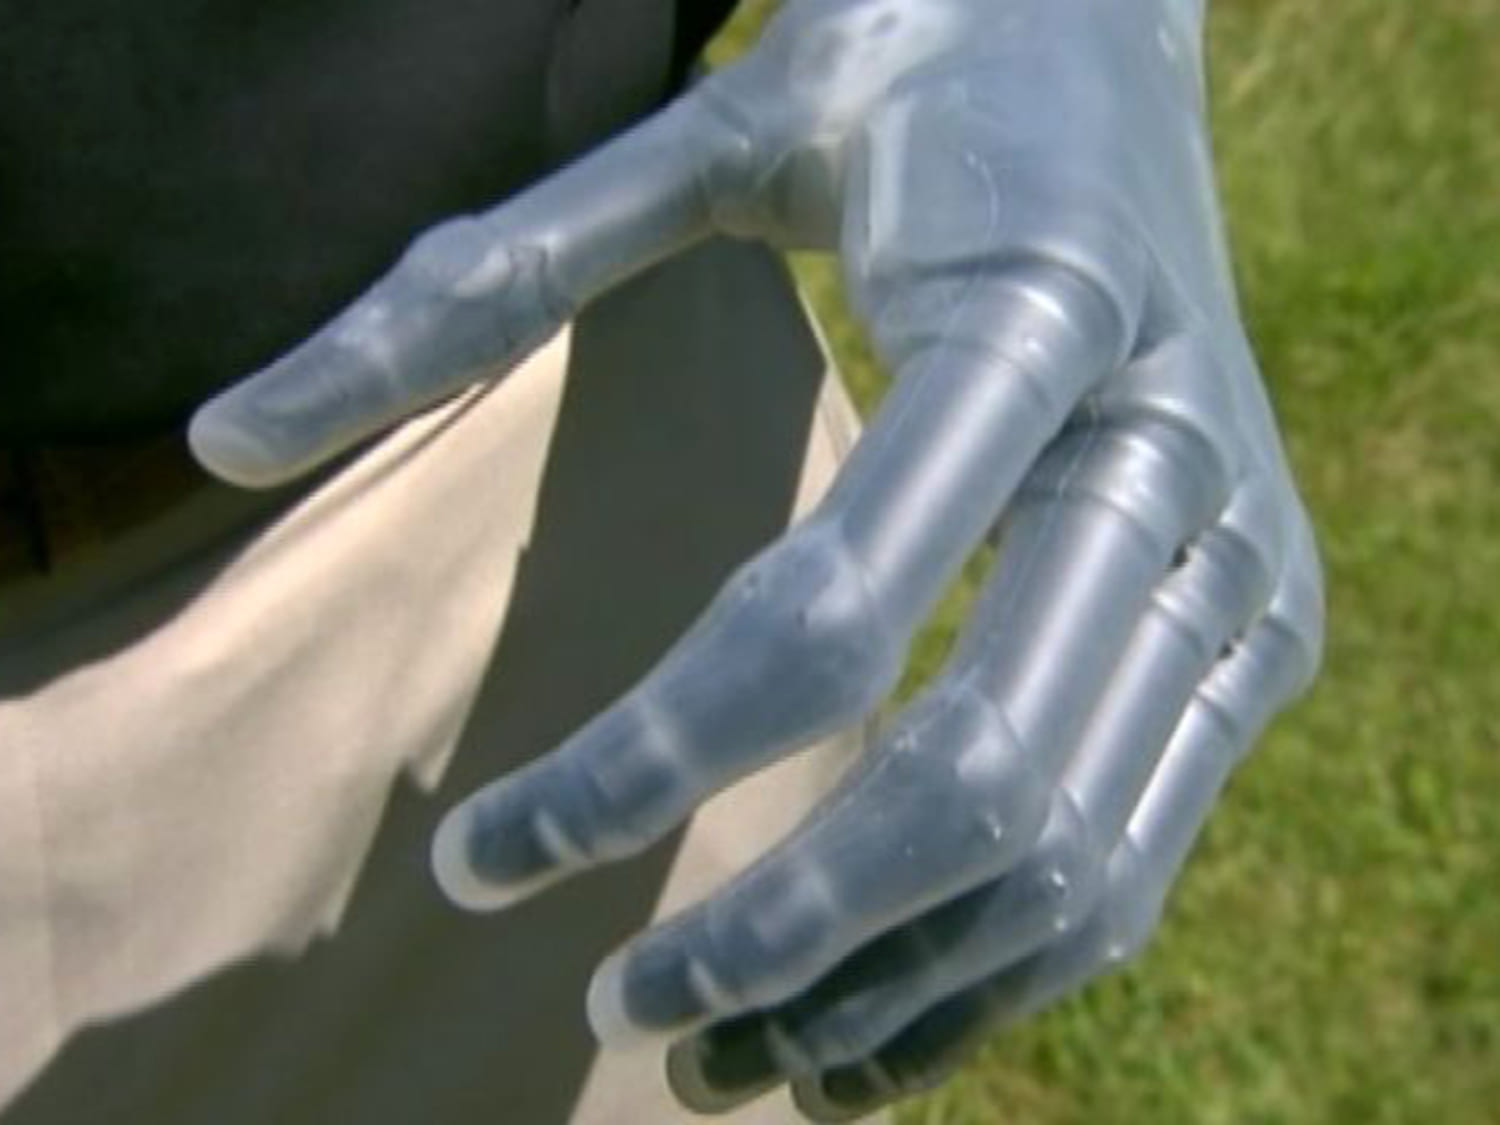 Amputee ditches prosthetic hook for bionic hand